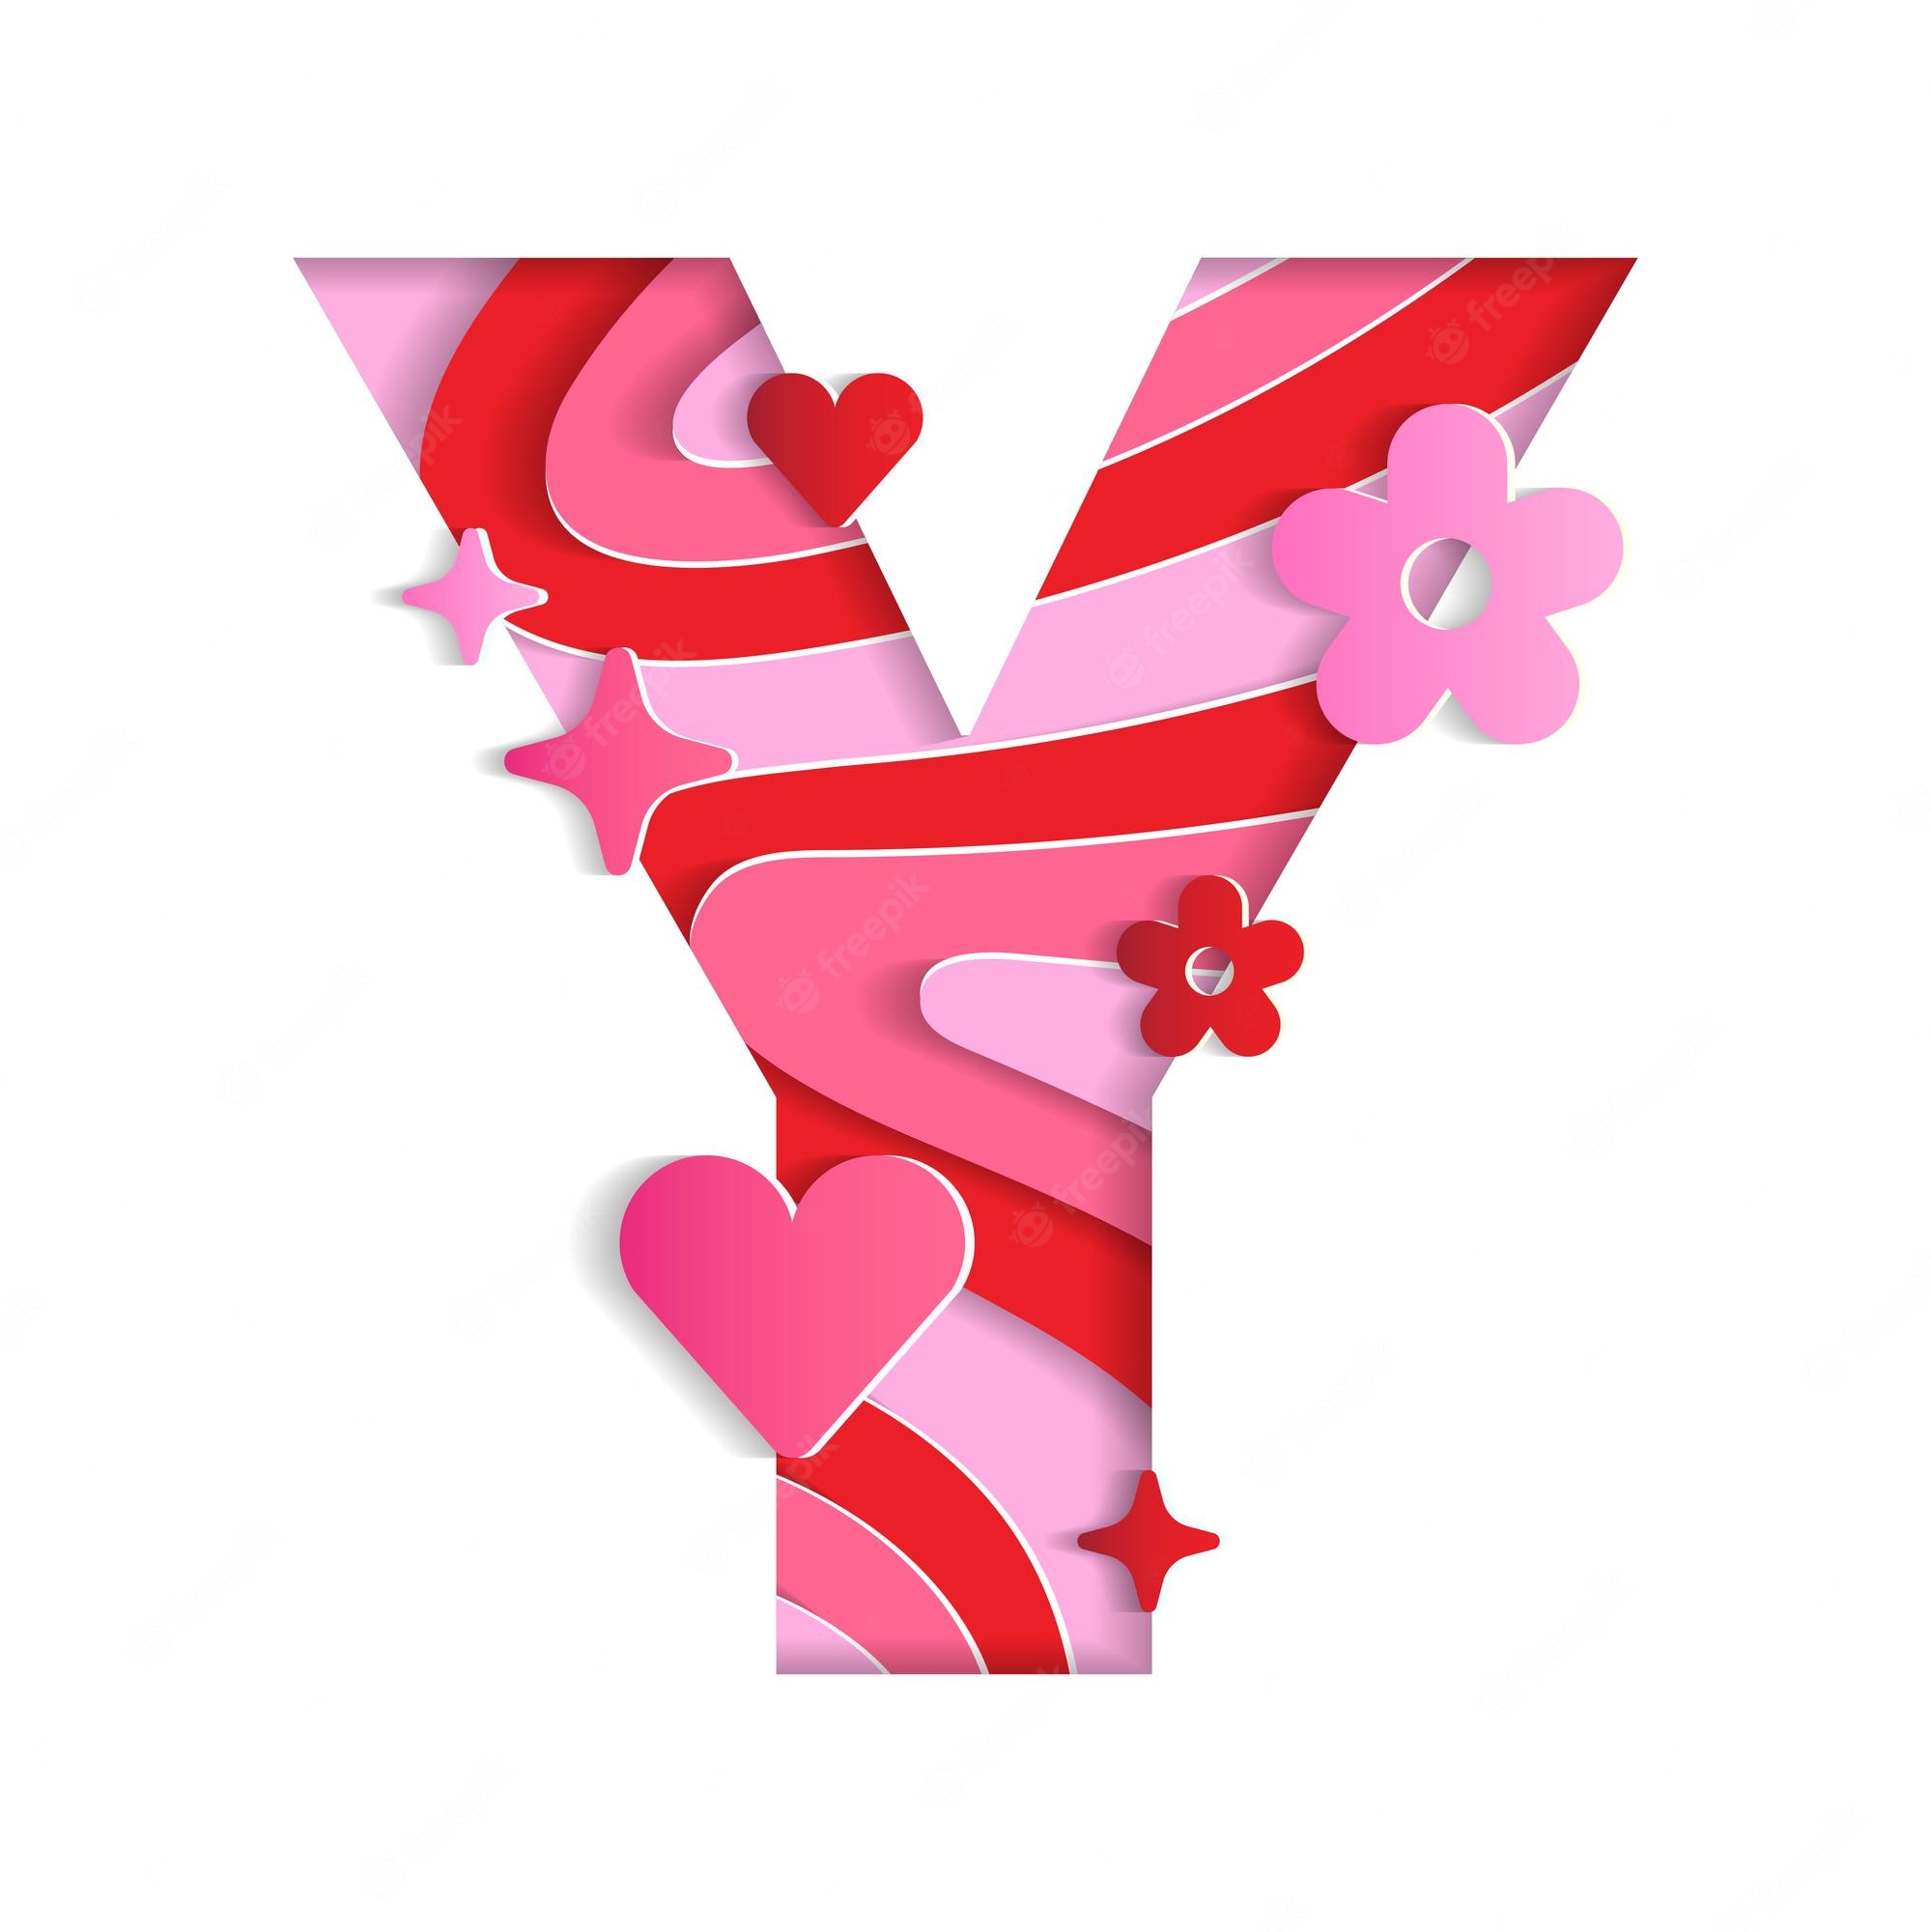 y alphabet valentines day love character font letter paper flower heart 3d layer paper cutout card 307151 974